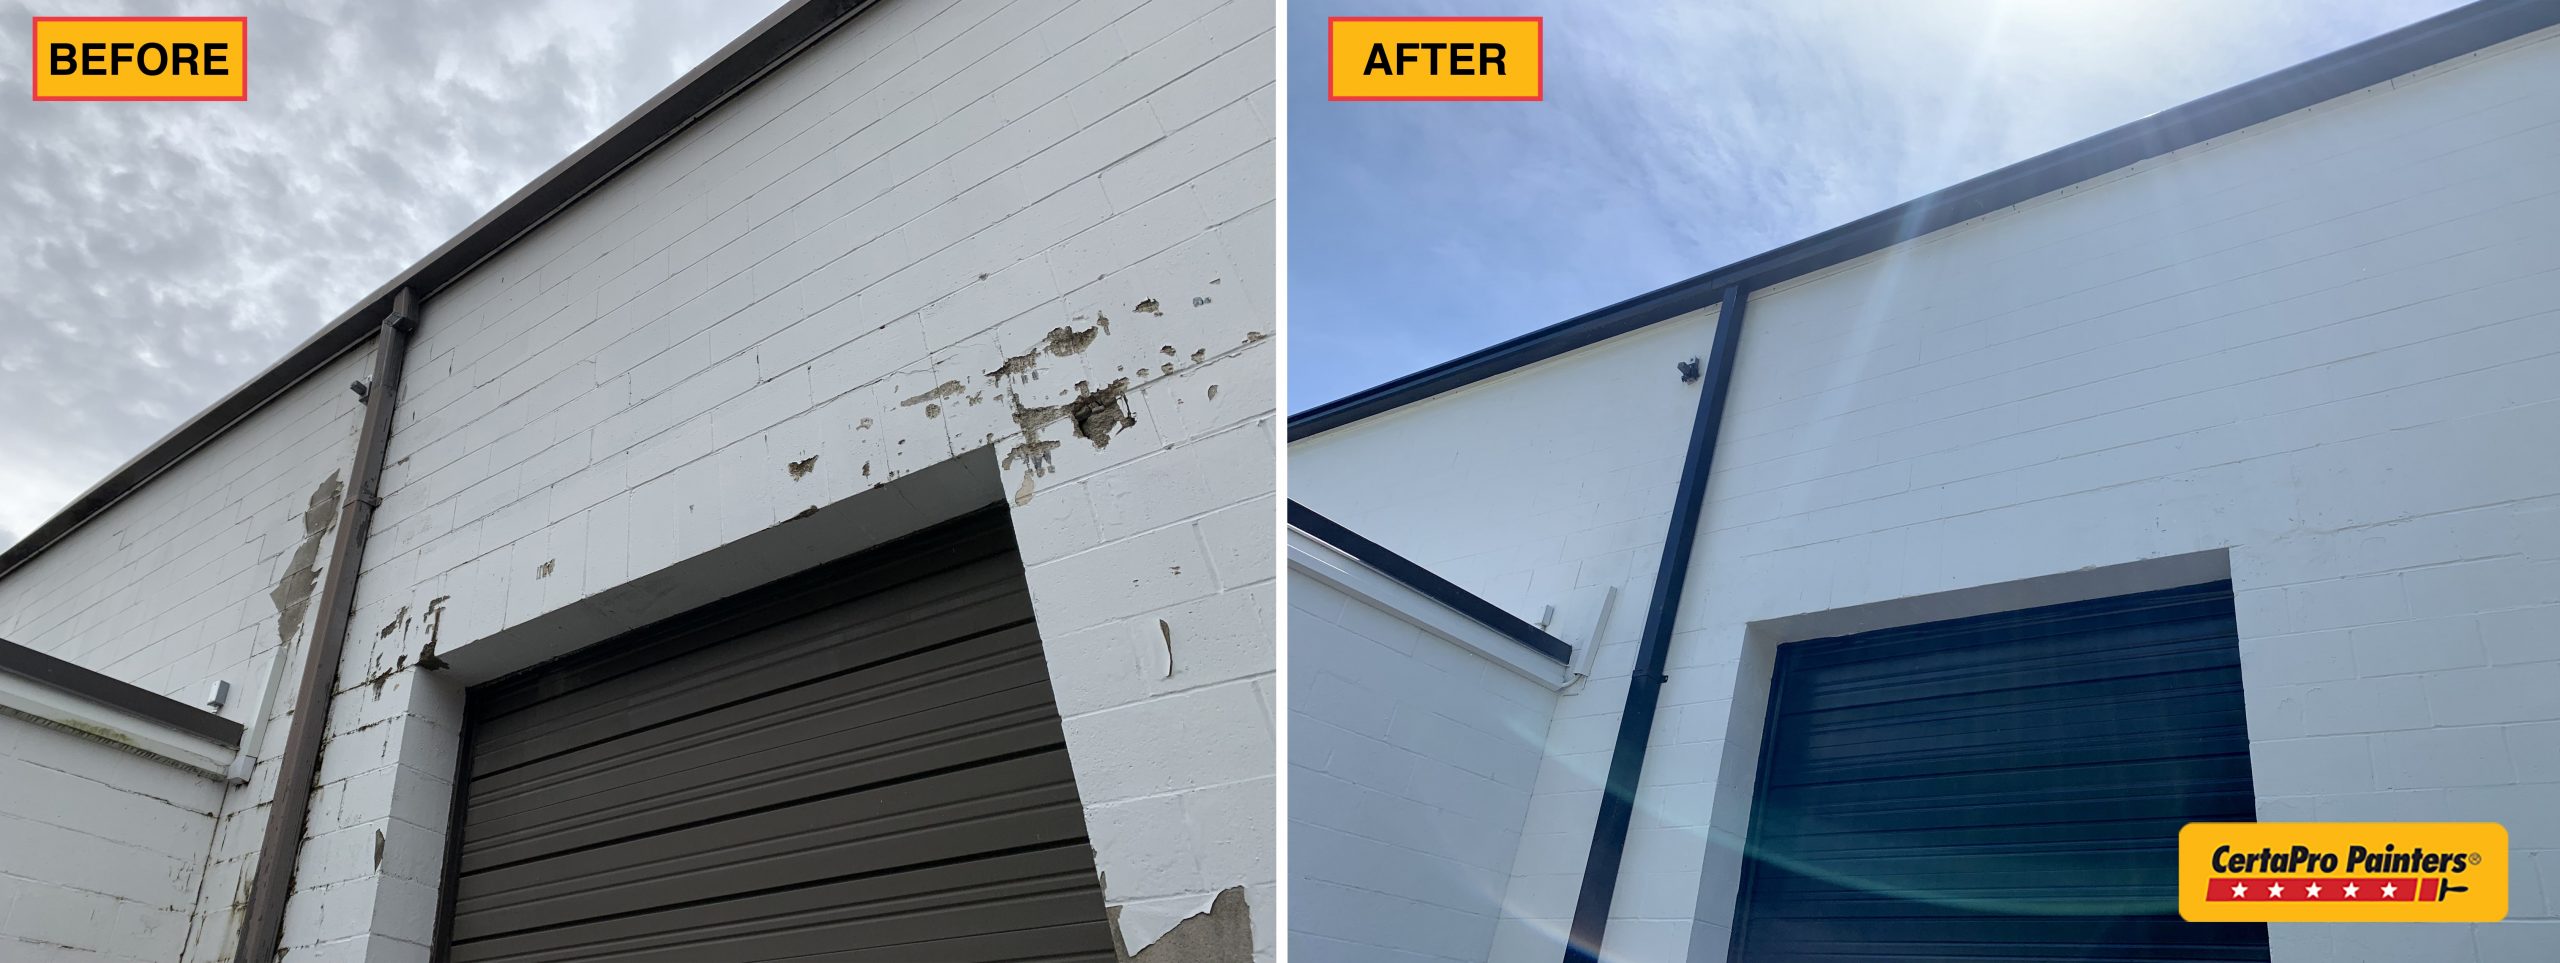 exterior before and after